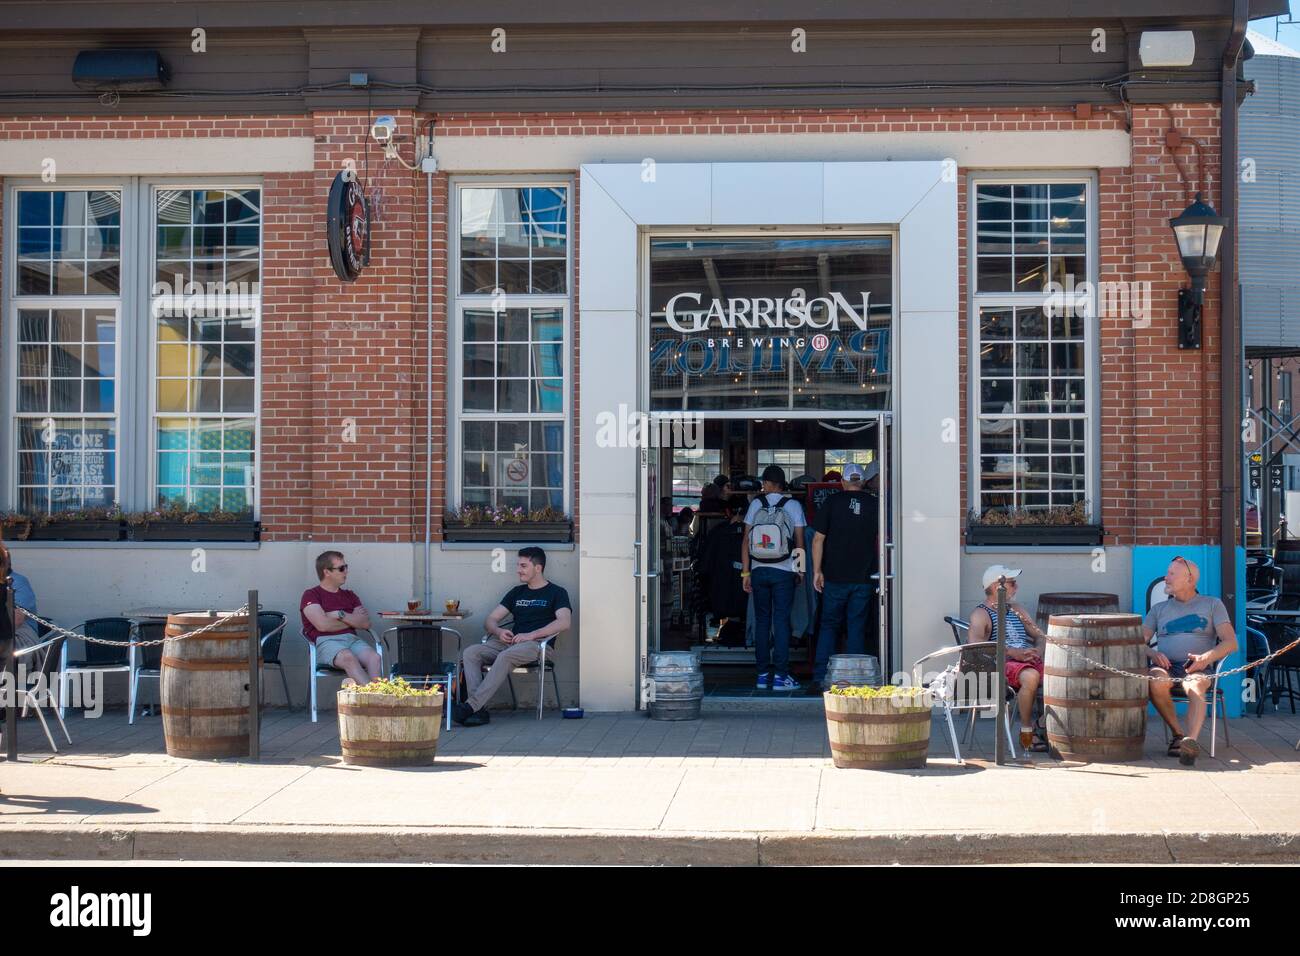 Garrison Brewery Entrance A Craft Beer Brewery At The Cruise Ship Farmers Market In Seaport Halifax Nova Scotia Canada Stock Photo